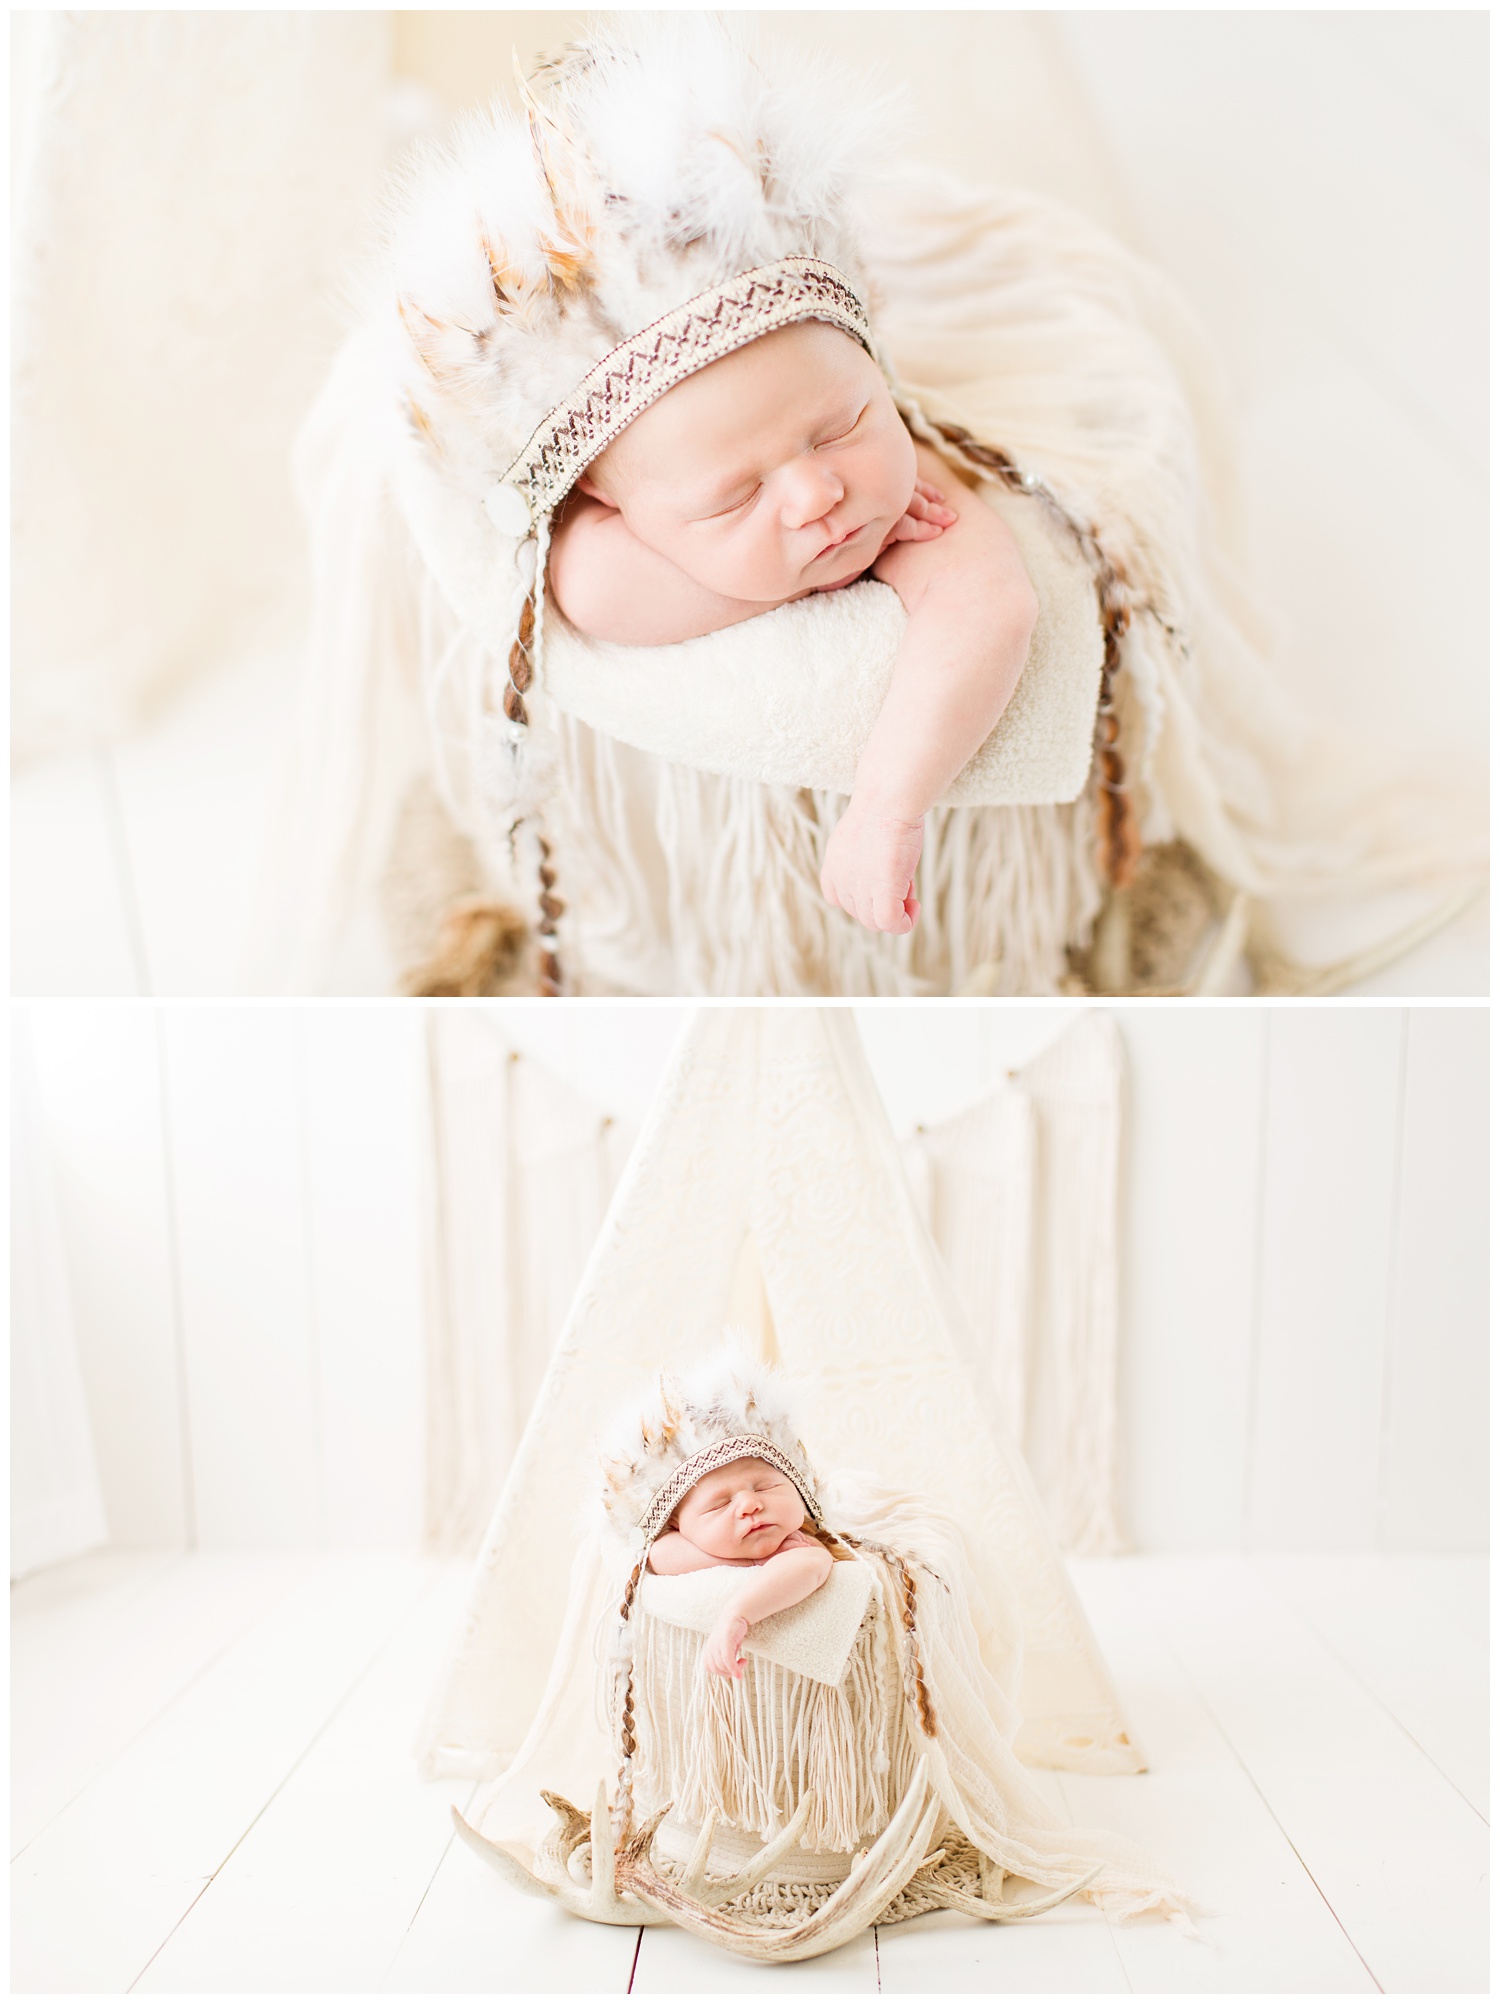 Newborn baby posing in an Indian theme photography set up wearing an Indian headdress